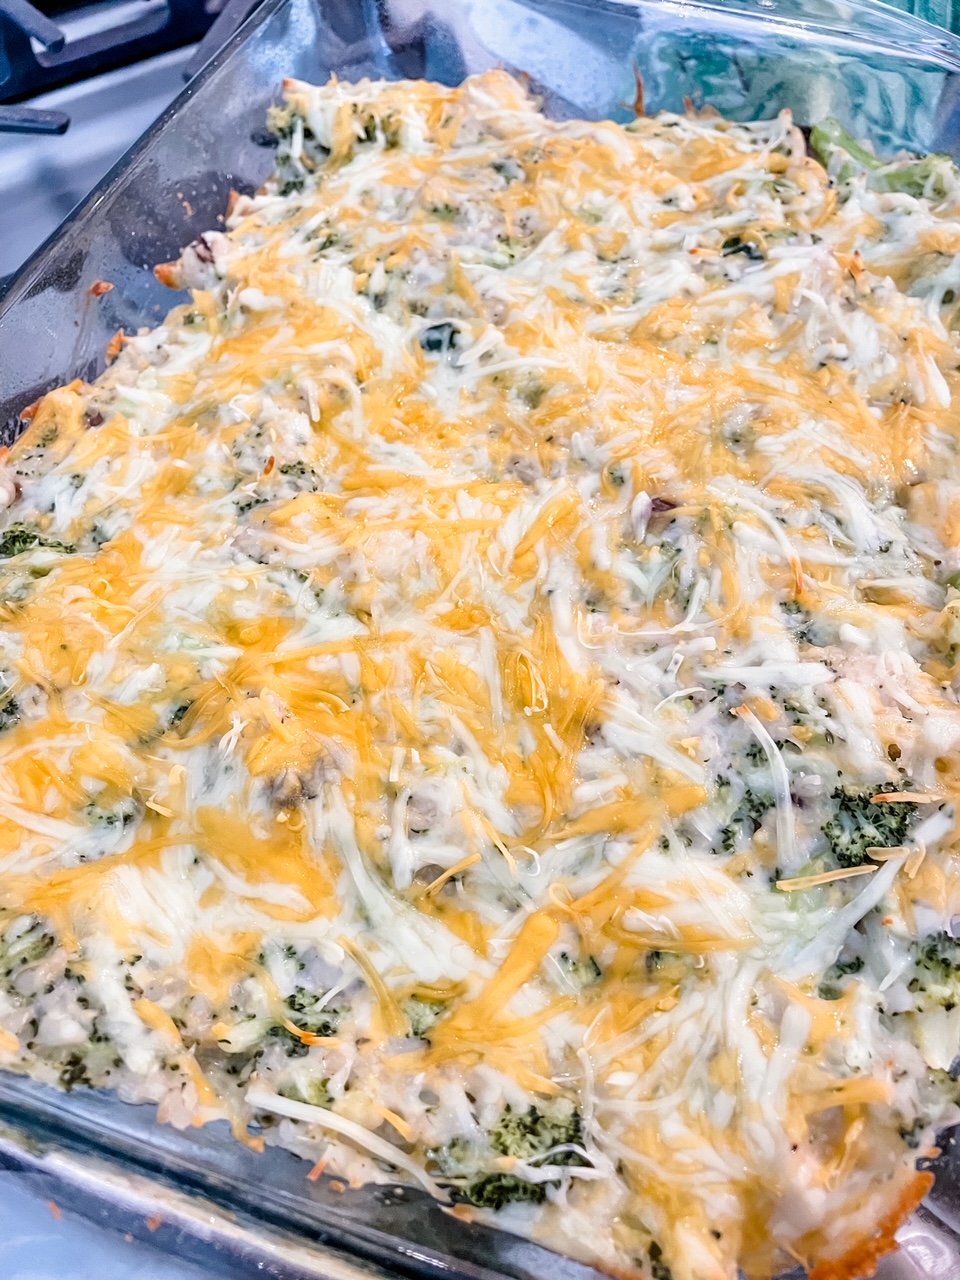 The finished Healthier Broccoli Rice Casserole with Chicken in a clear casserole dish